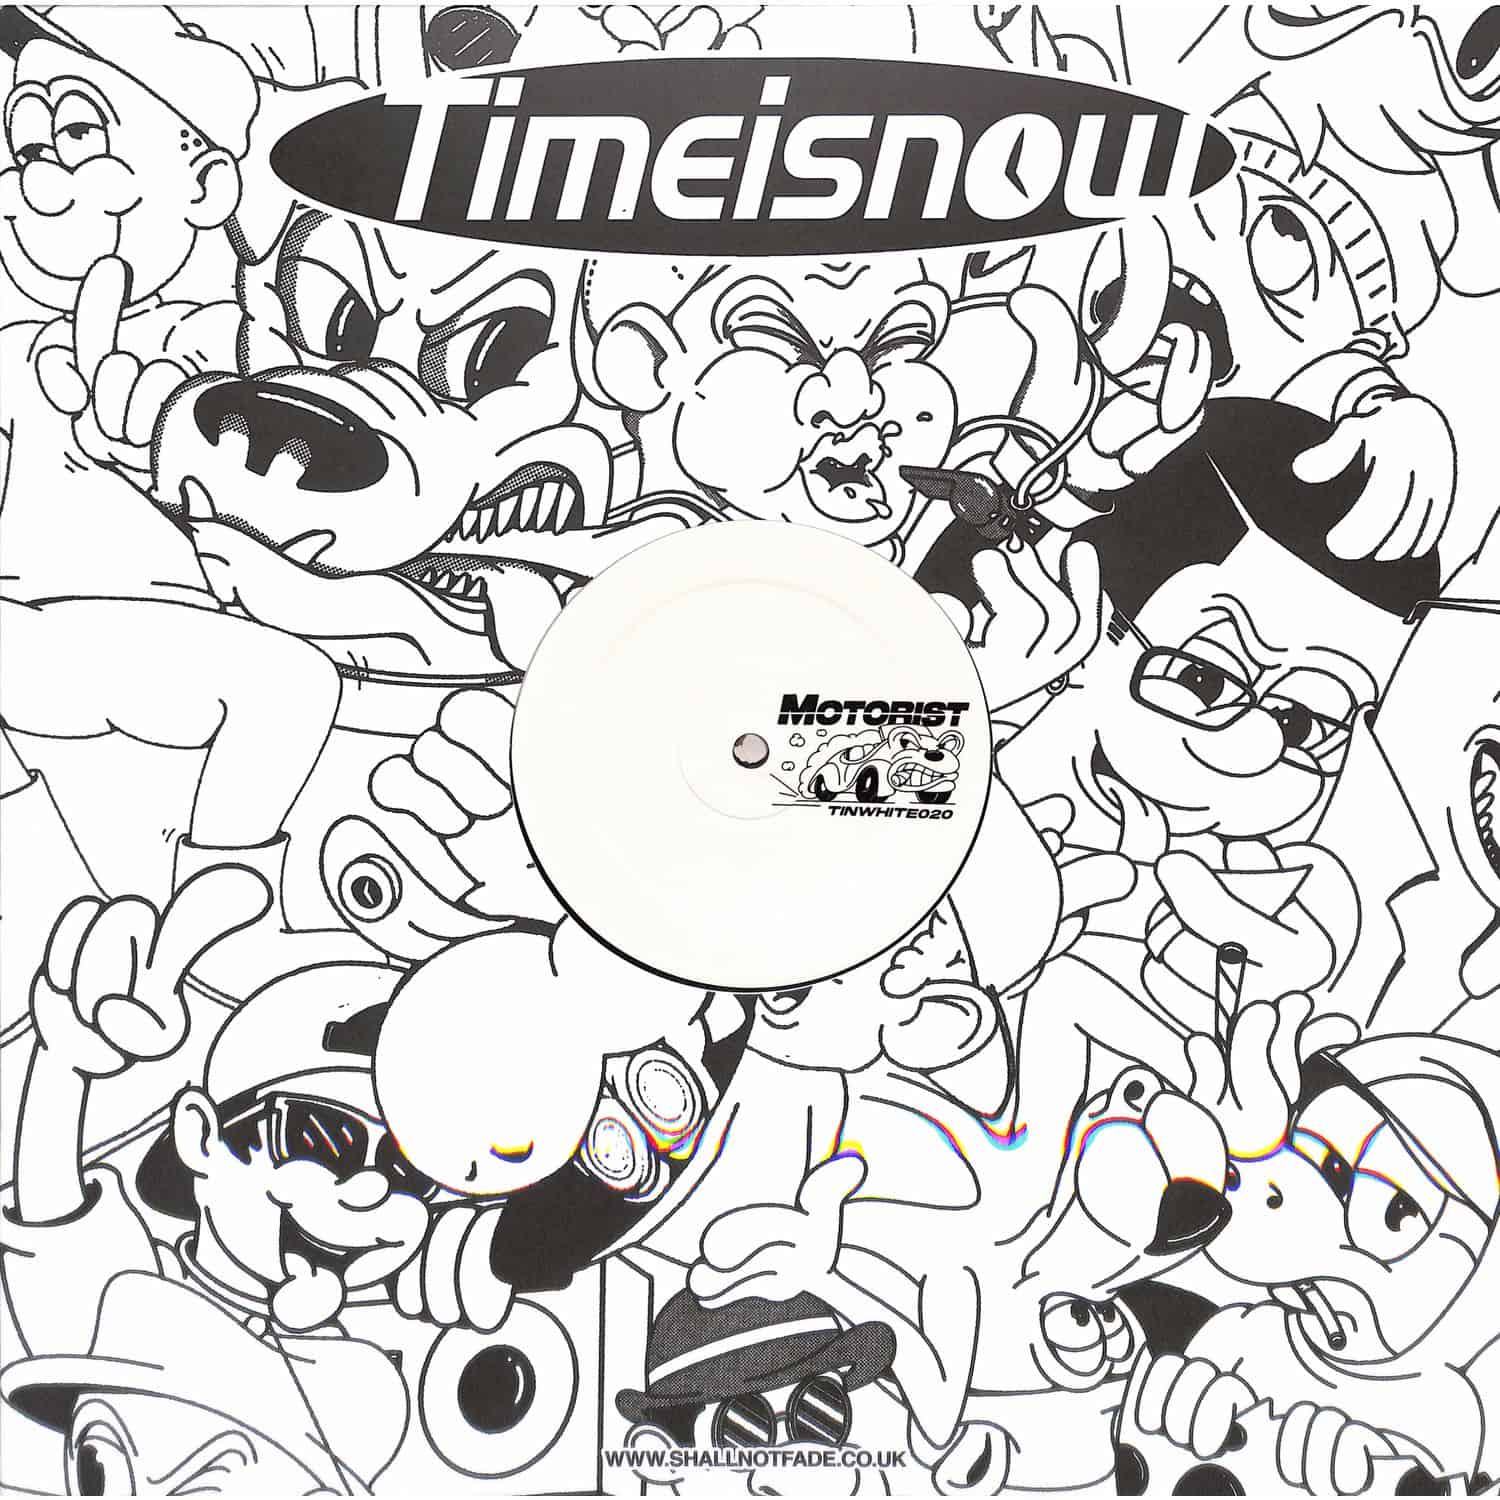 Motorist - TIME IS NOW WHITE VOL. 20